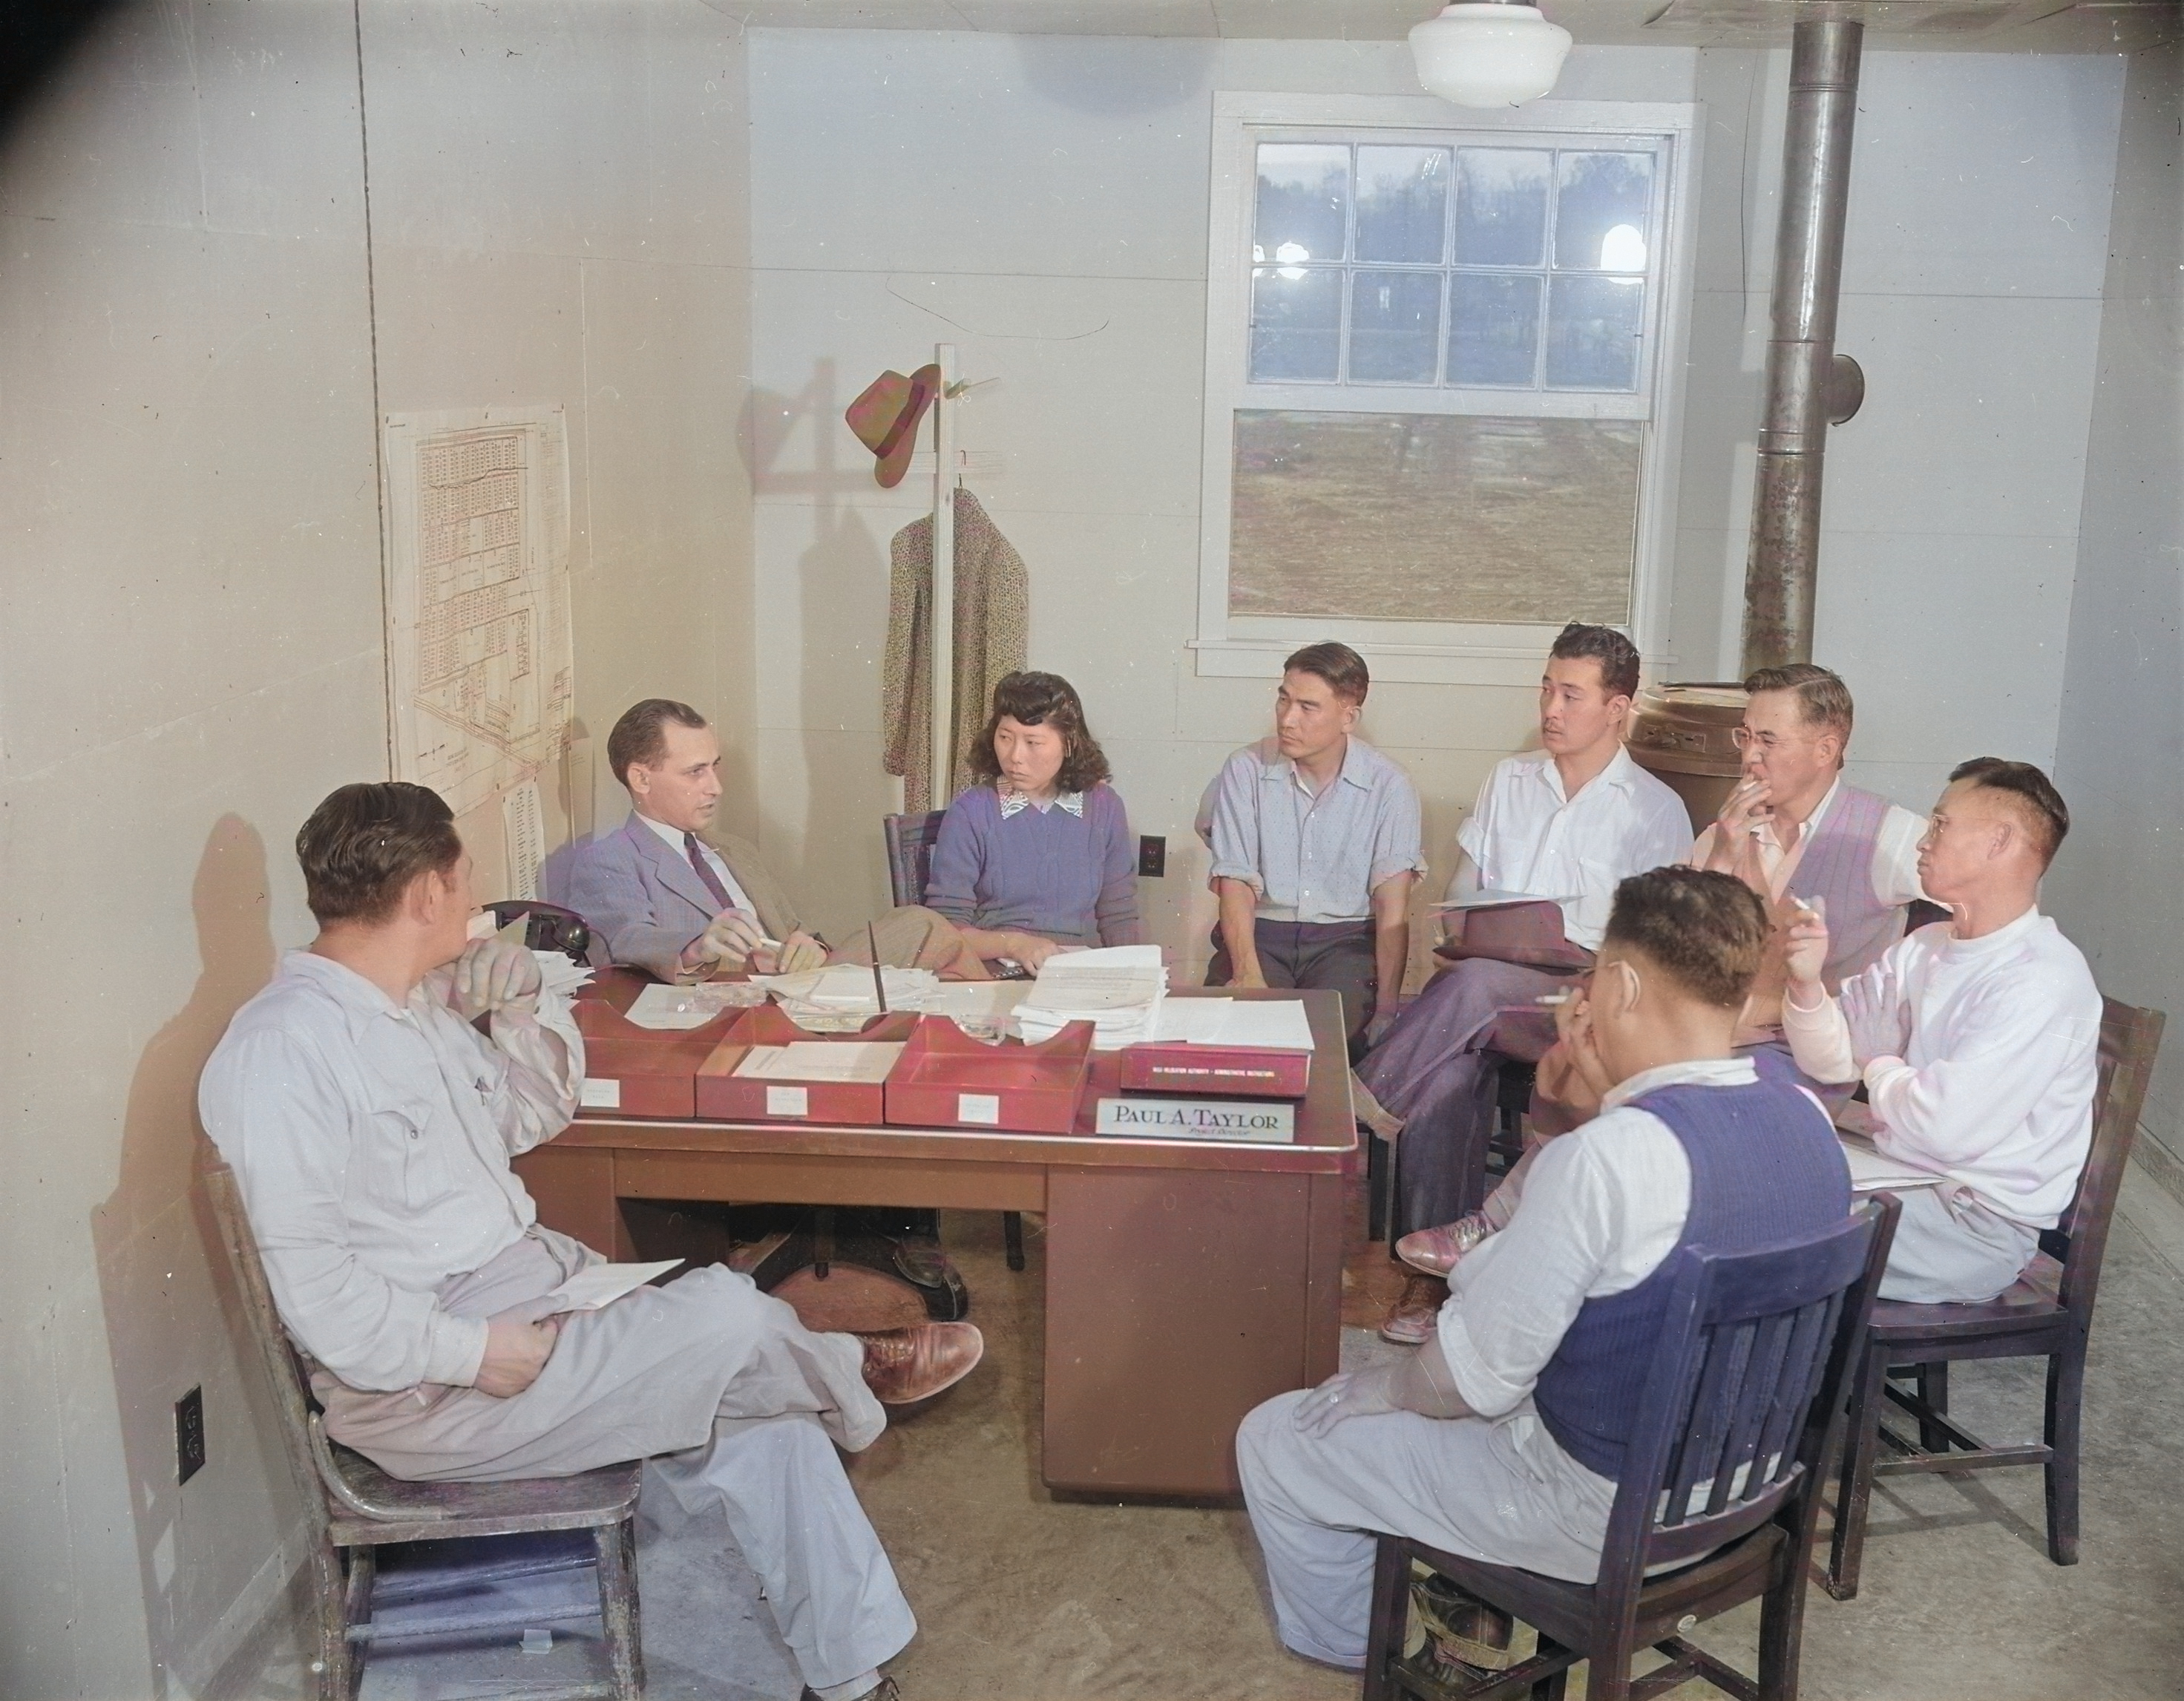 Project Director Paul Taylor speaking with the Council Committee of Jerome War Relocation Center, Arkansas, United States, 18 Nov 1942, photo 2 of 2 [Colorized by WW2DB]